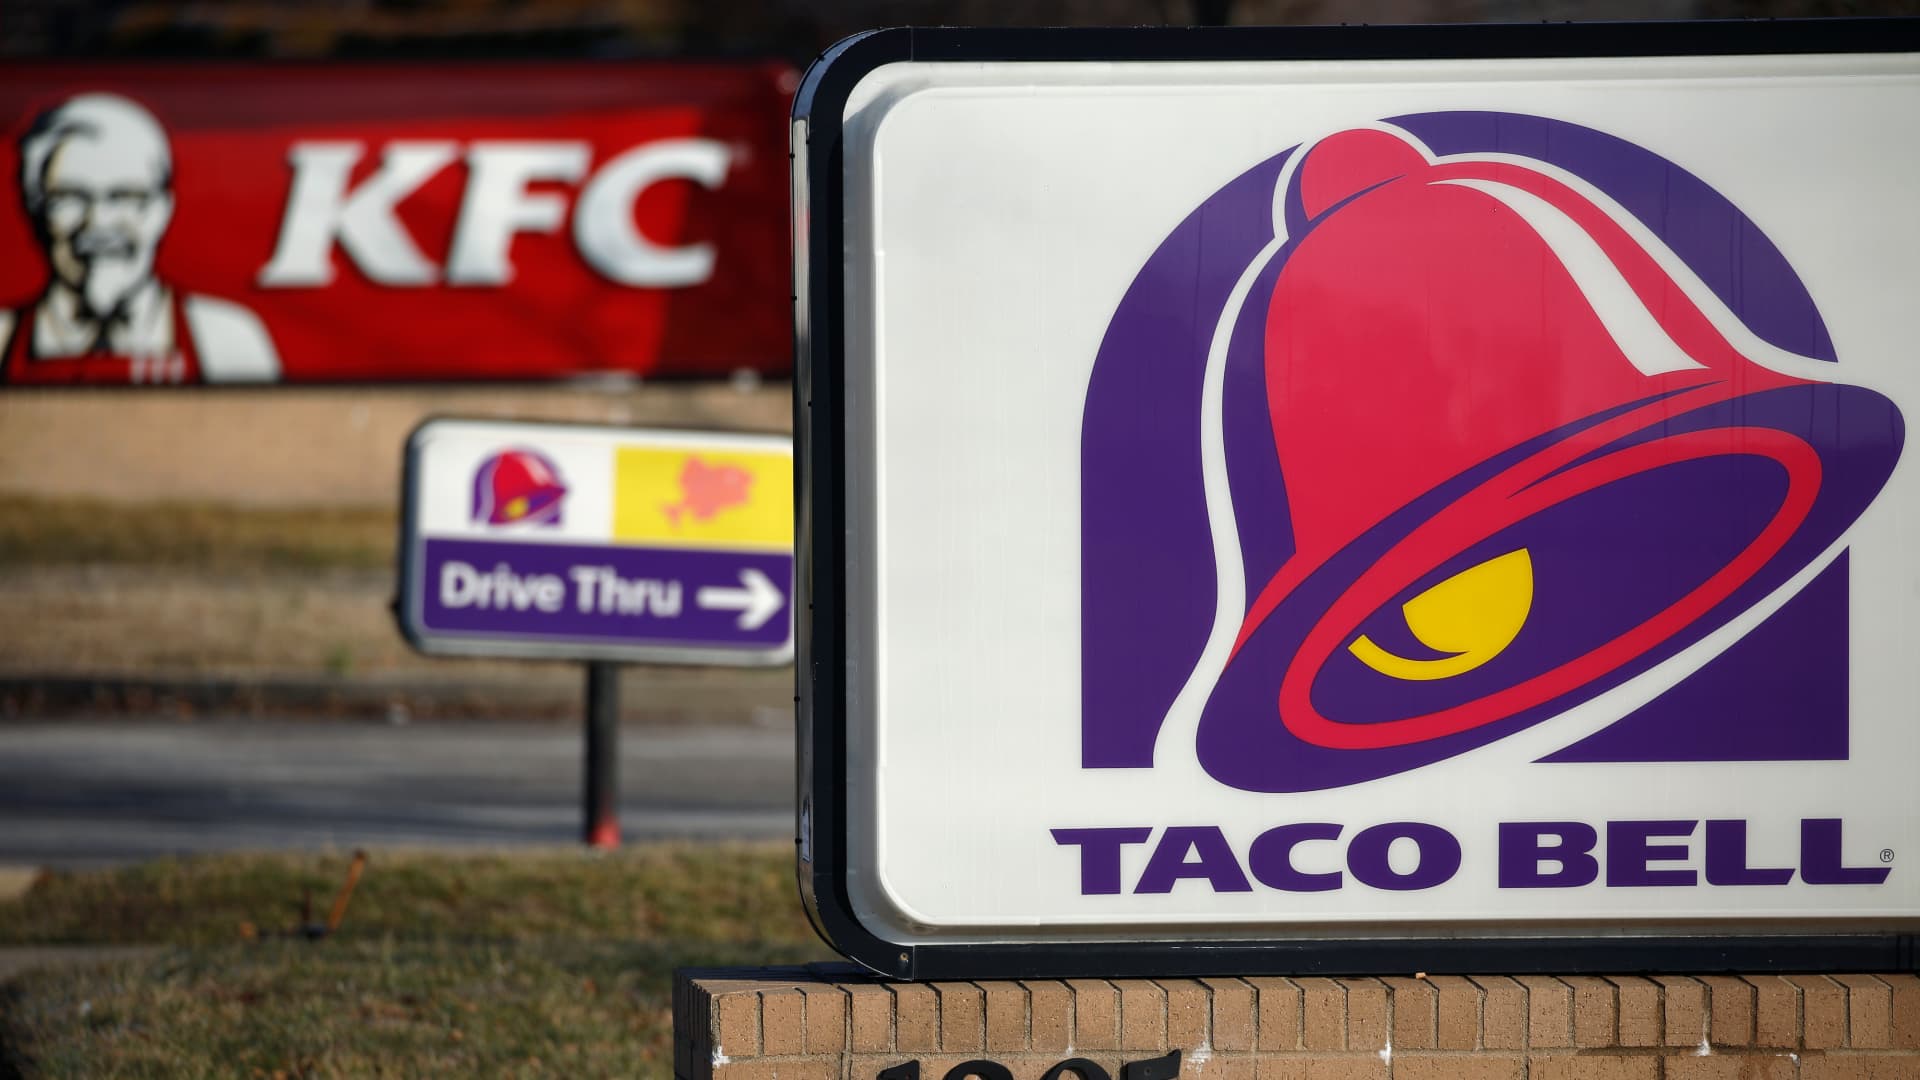 Signage is displayed outside a Yum! Brands Inc. Taco Bell and Kentucky Fried Chicken (KFC) restaurant in Louisville, Kentucky, U.S., on Thursday, Jan. 30, 2020.